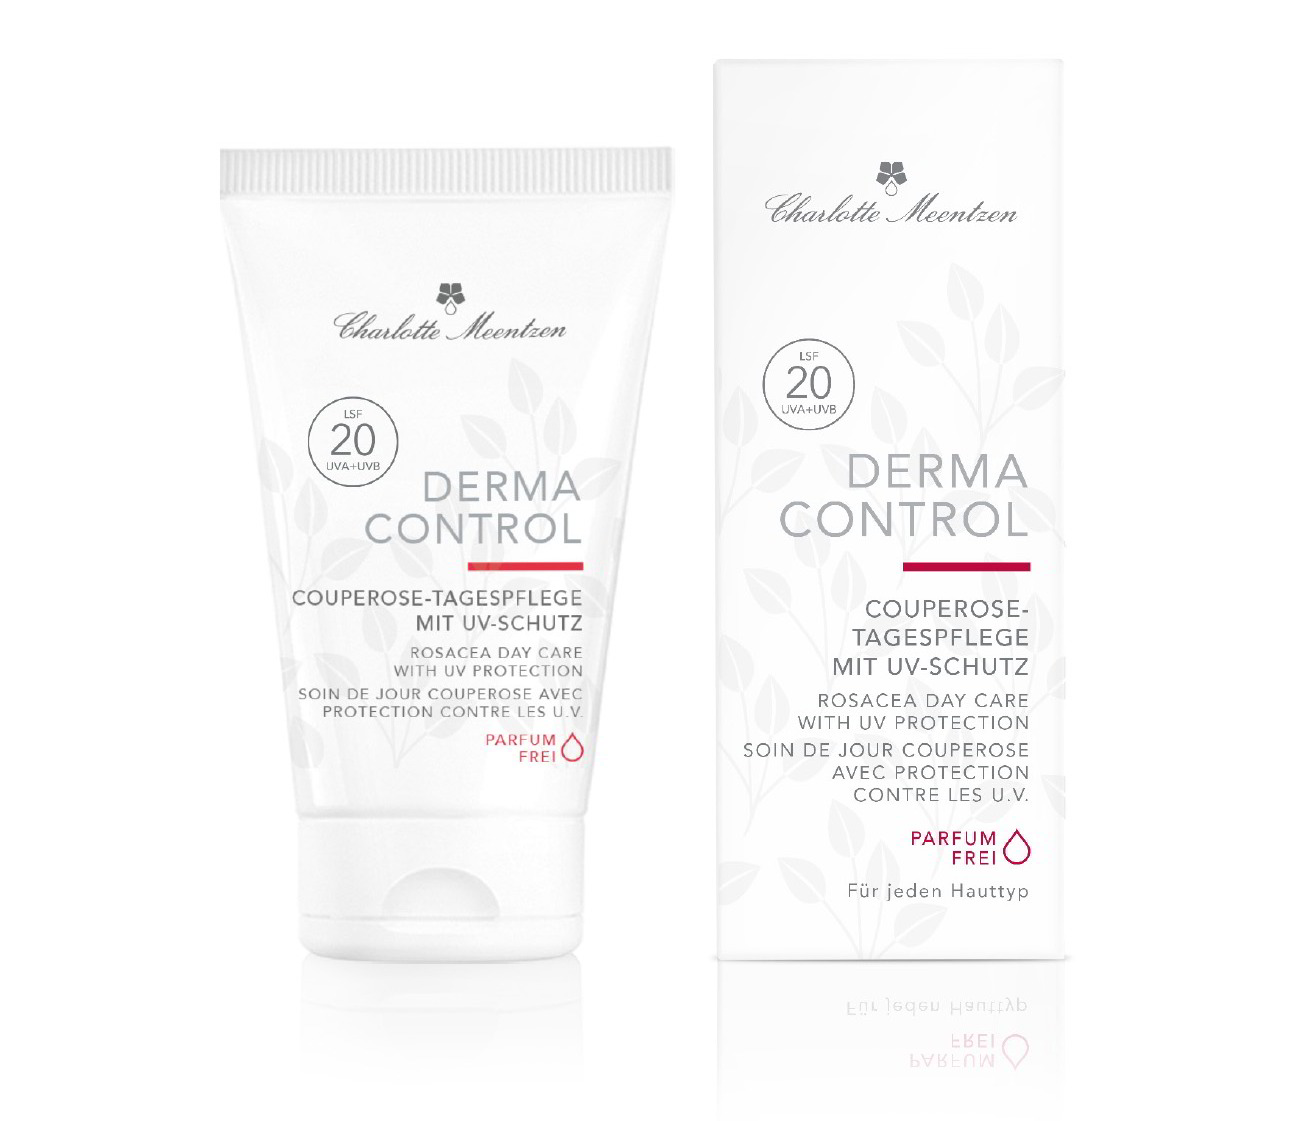 Derma Control Couperose-Tagespflege mit LSF 20